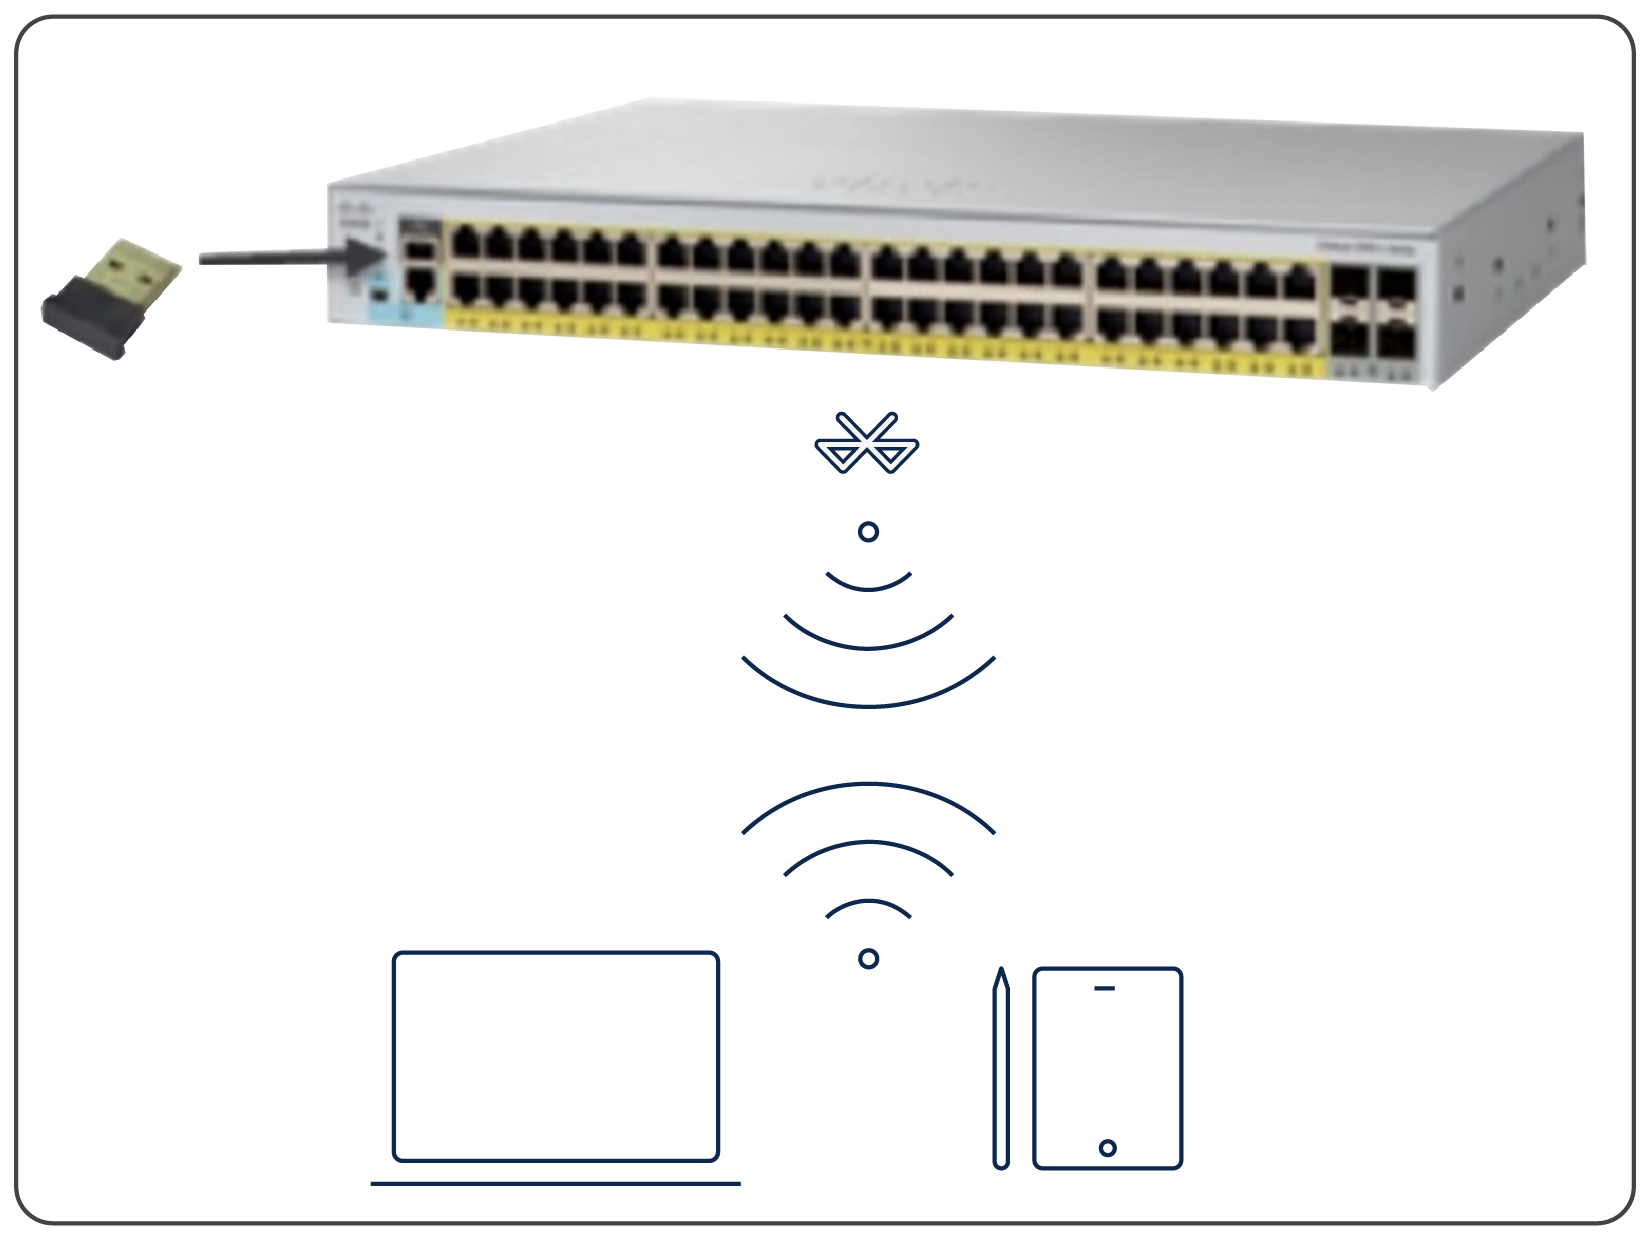 Buy Enterprise Switching - Cisco Catalyst 1000 8 Ports Gigabit Ethernet  ports with 2 x SFP and RJ-45 combo uplinks - C1000-8T-2G-L Online in  Hyderabad, India - Metapoint